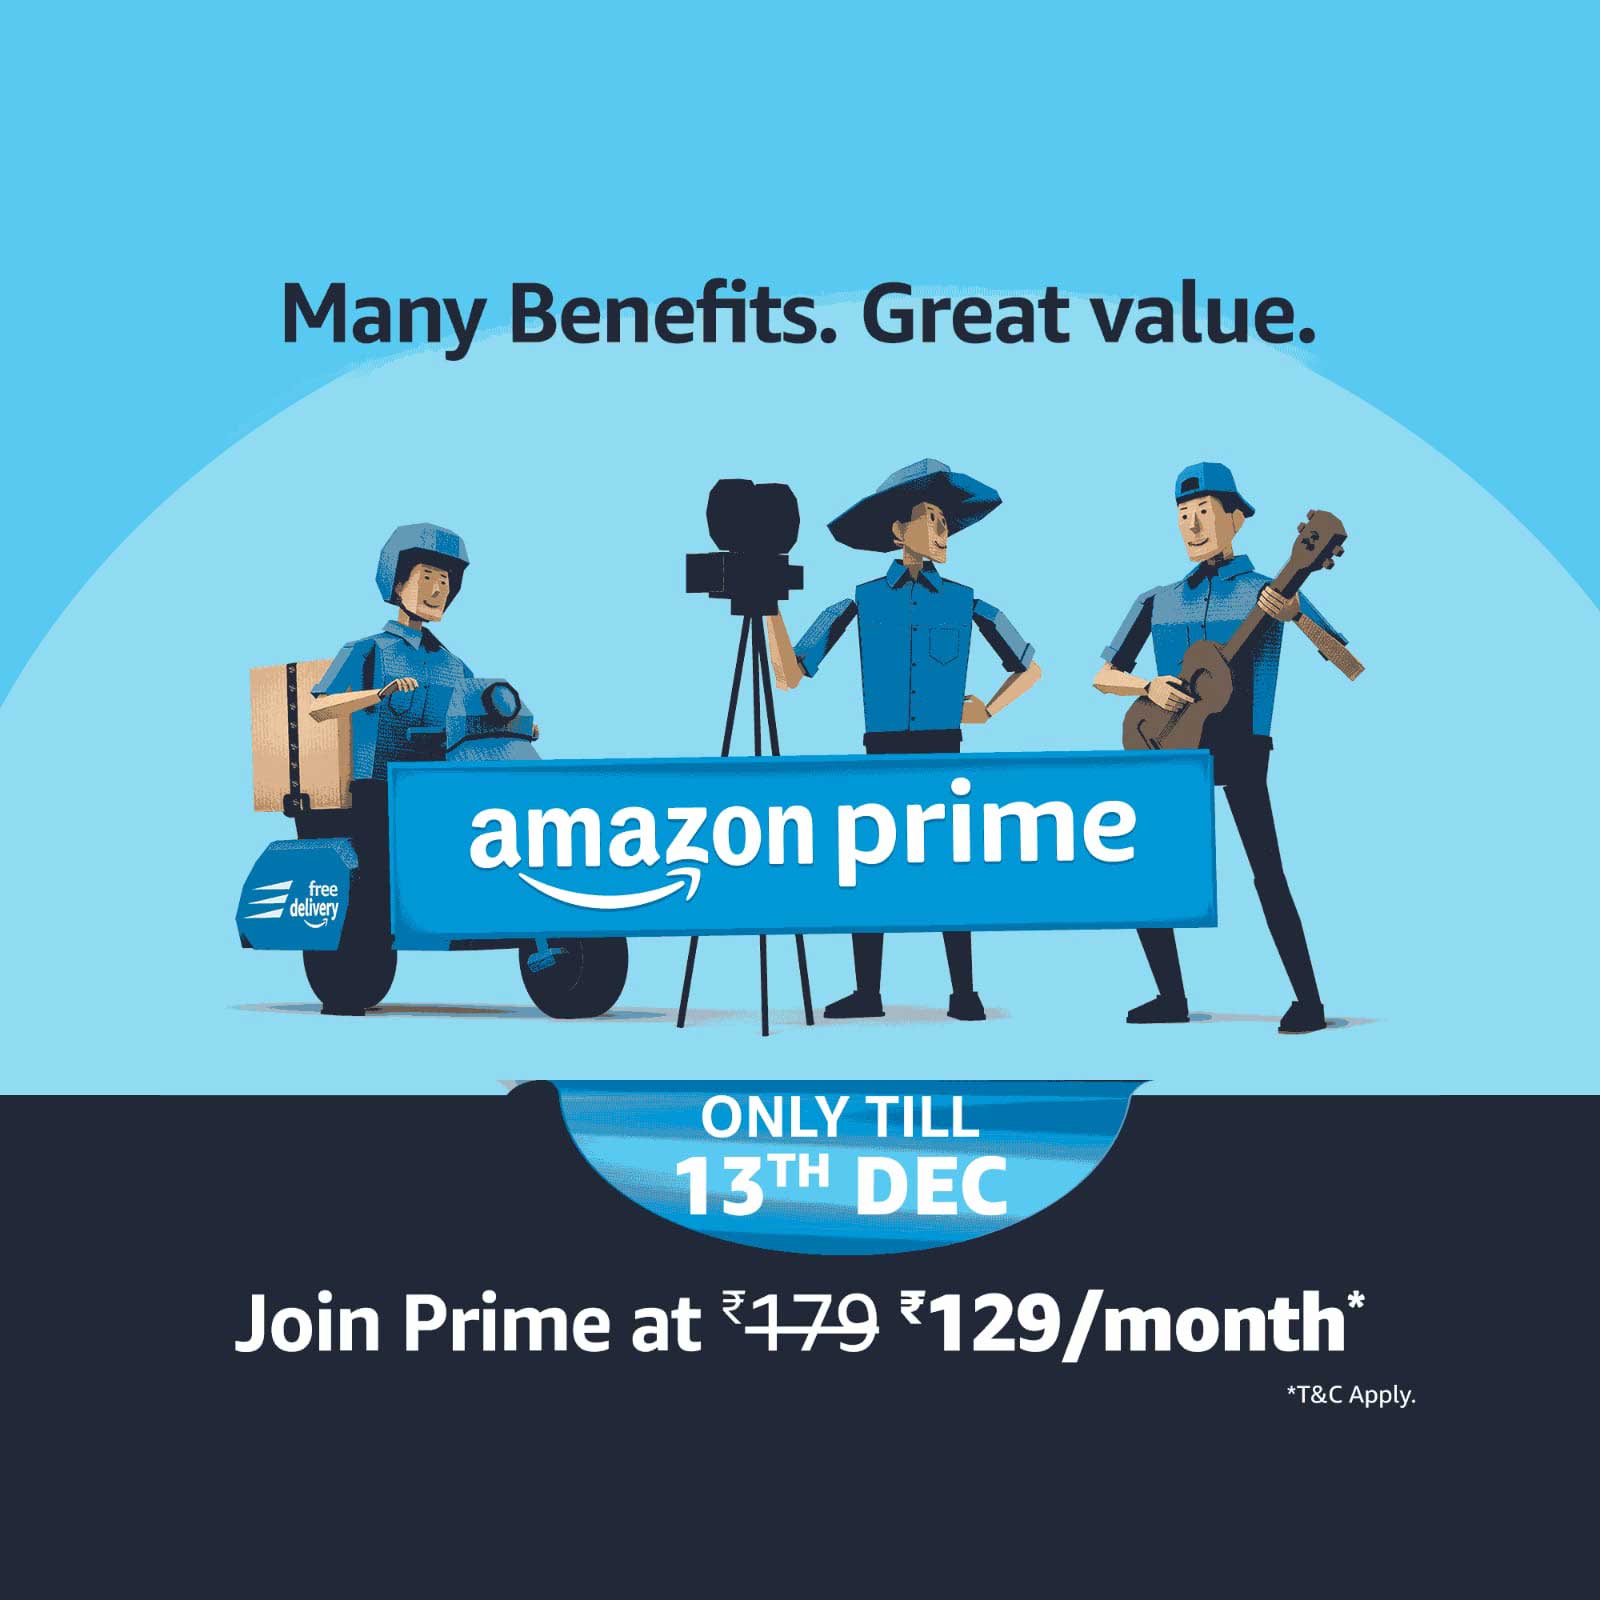 Amazon Prime Membership is available for 129/month instead of 179/month